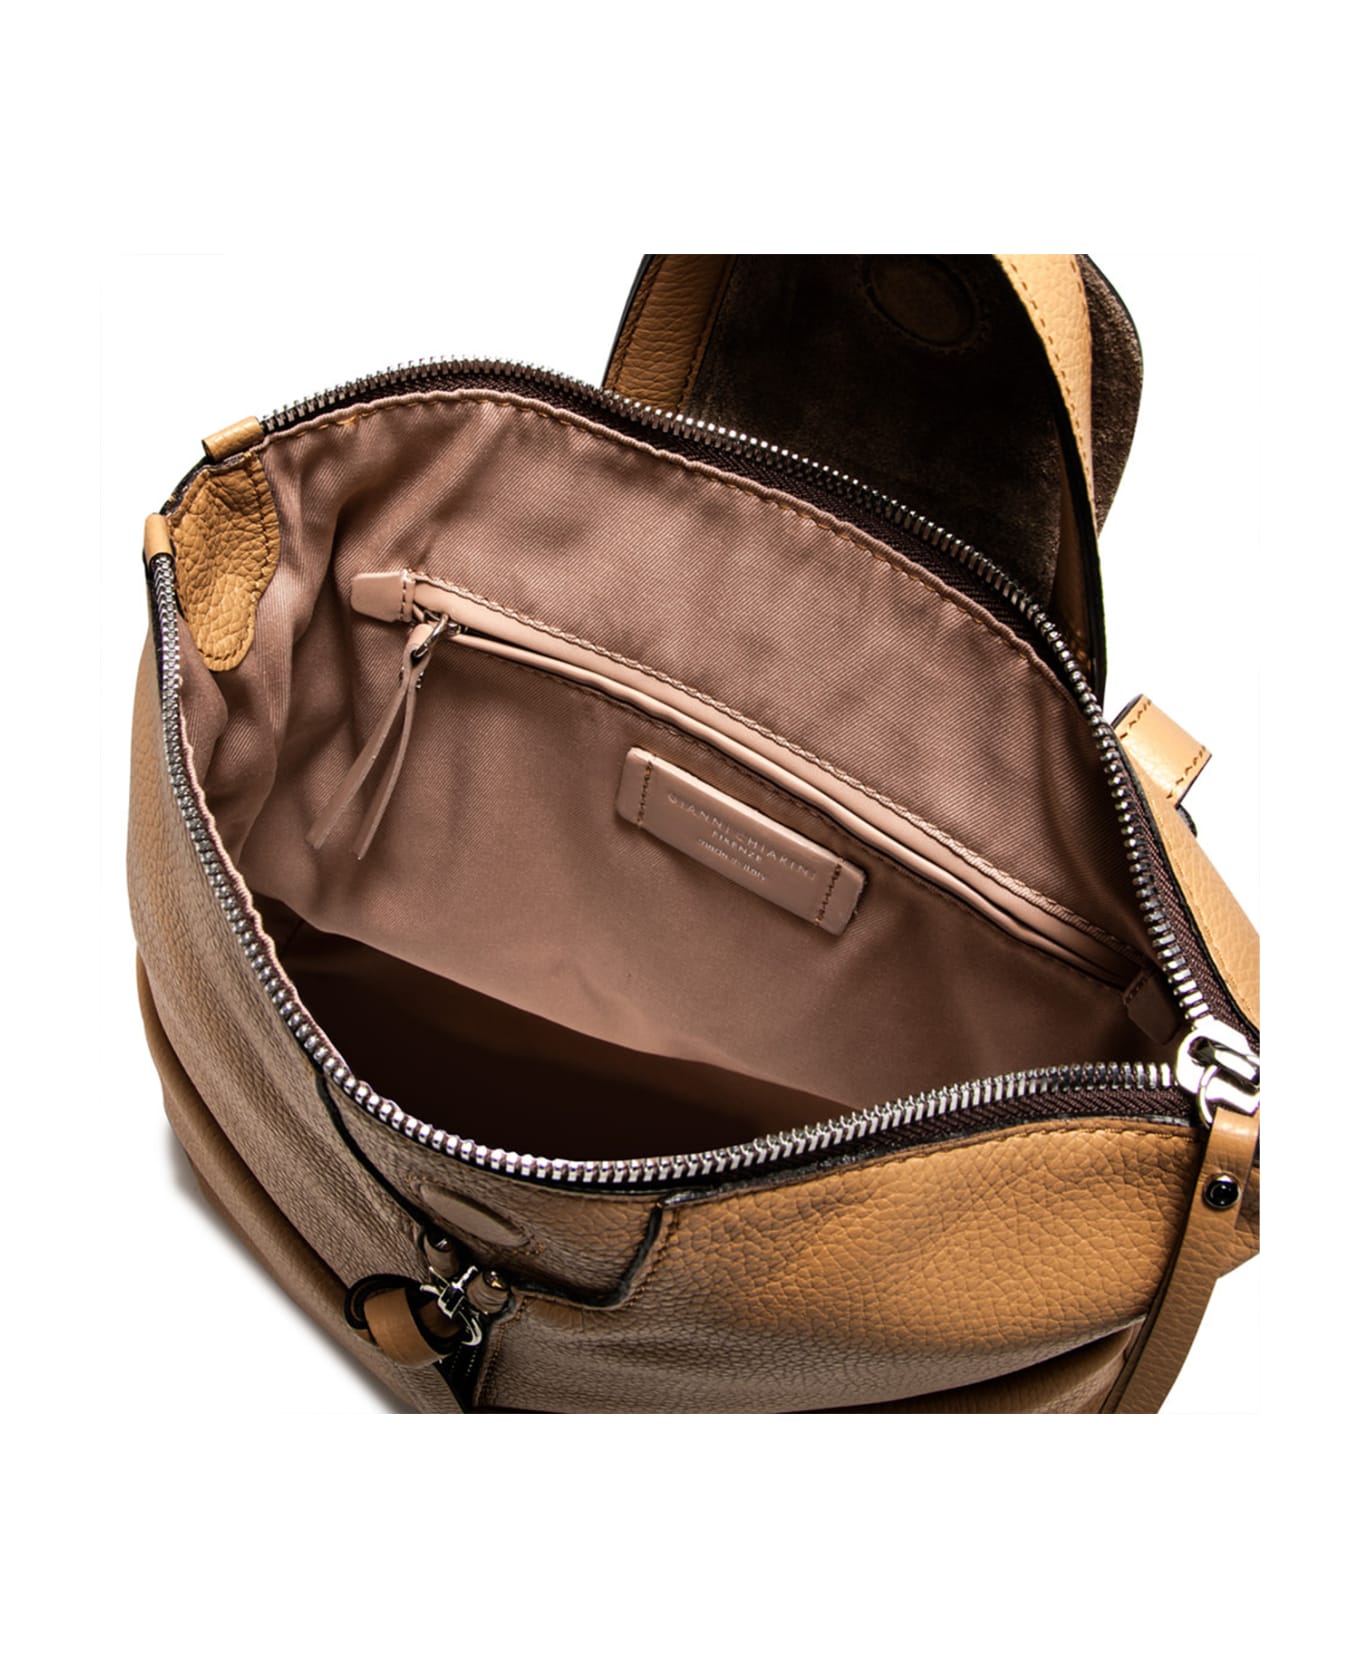 Gianni Chiarini Giada Leather Backpack With Front Zips - NATURE バックパック